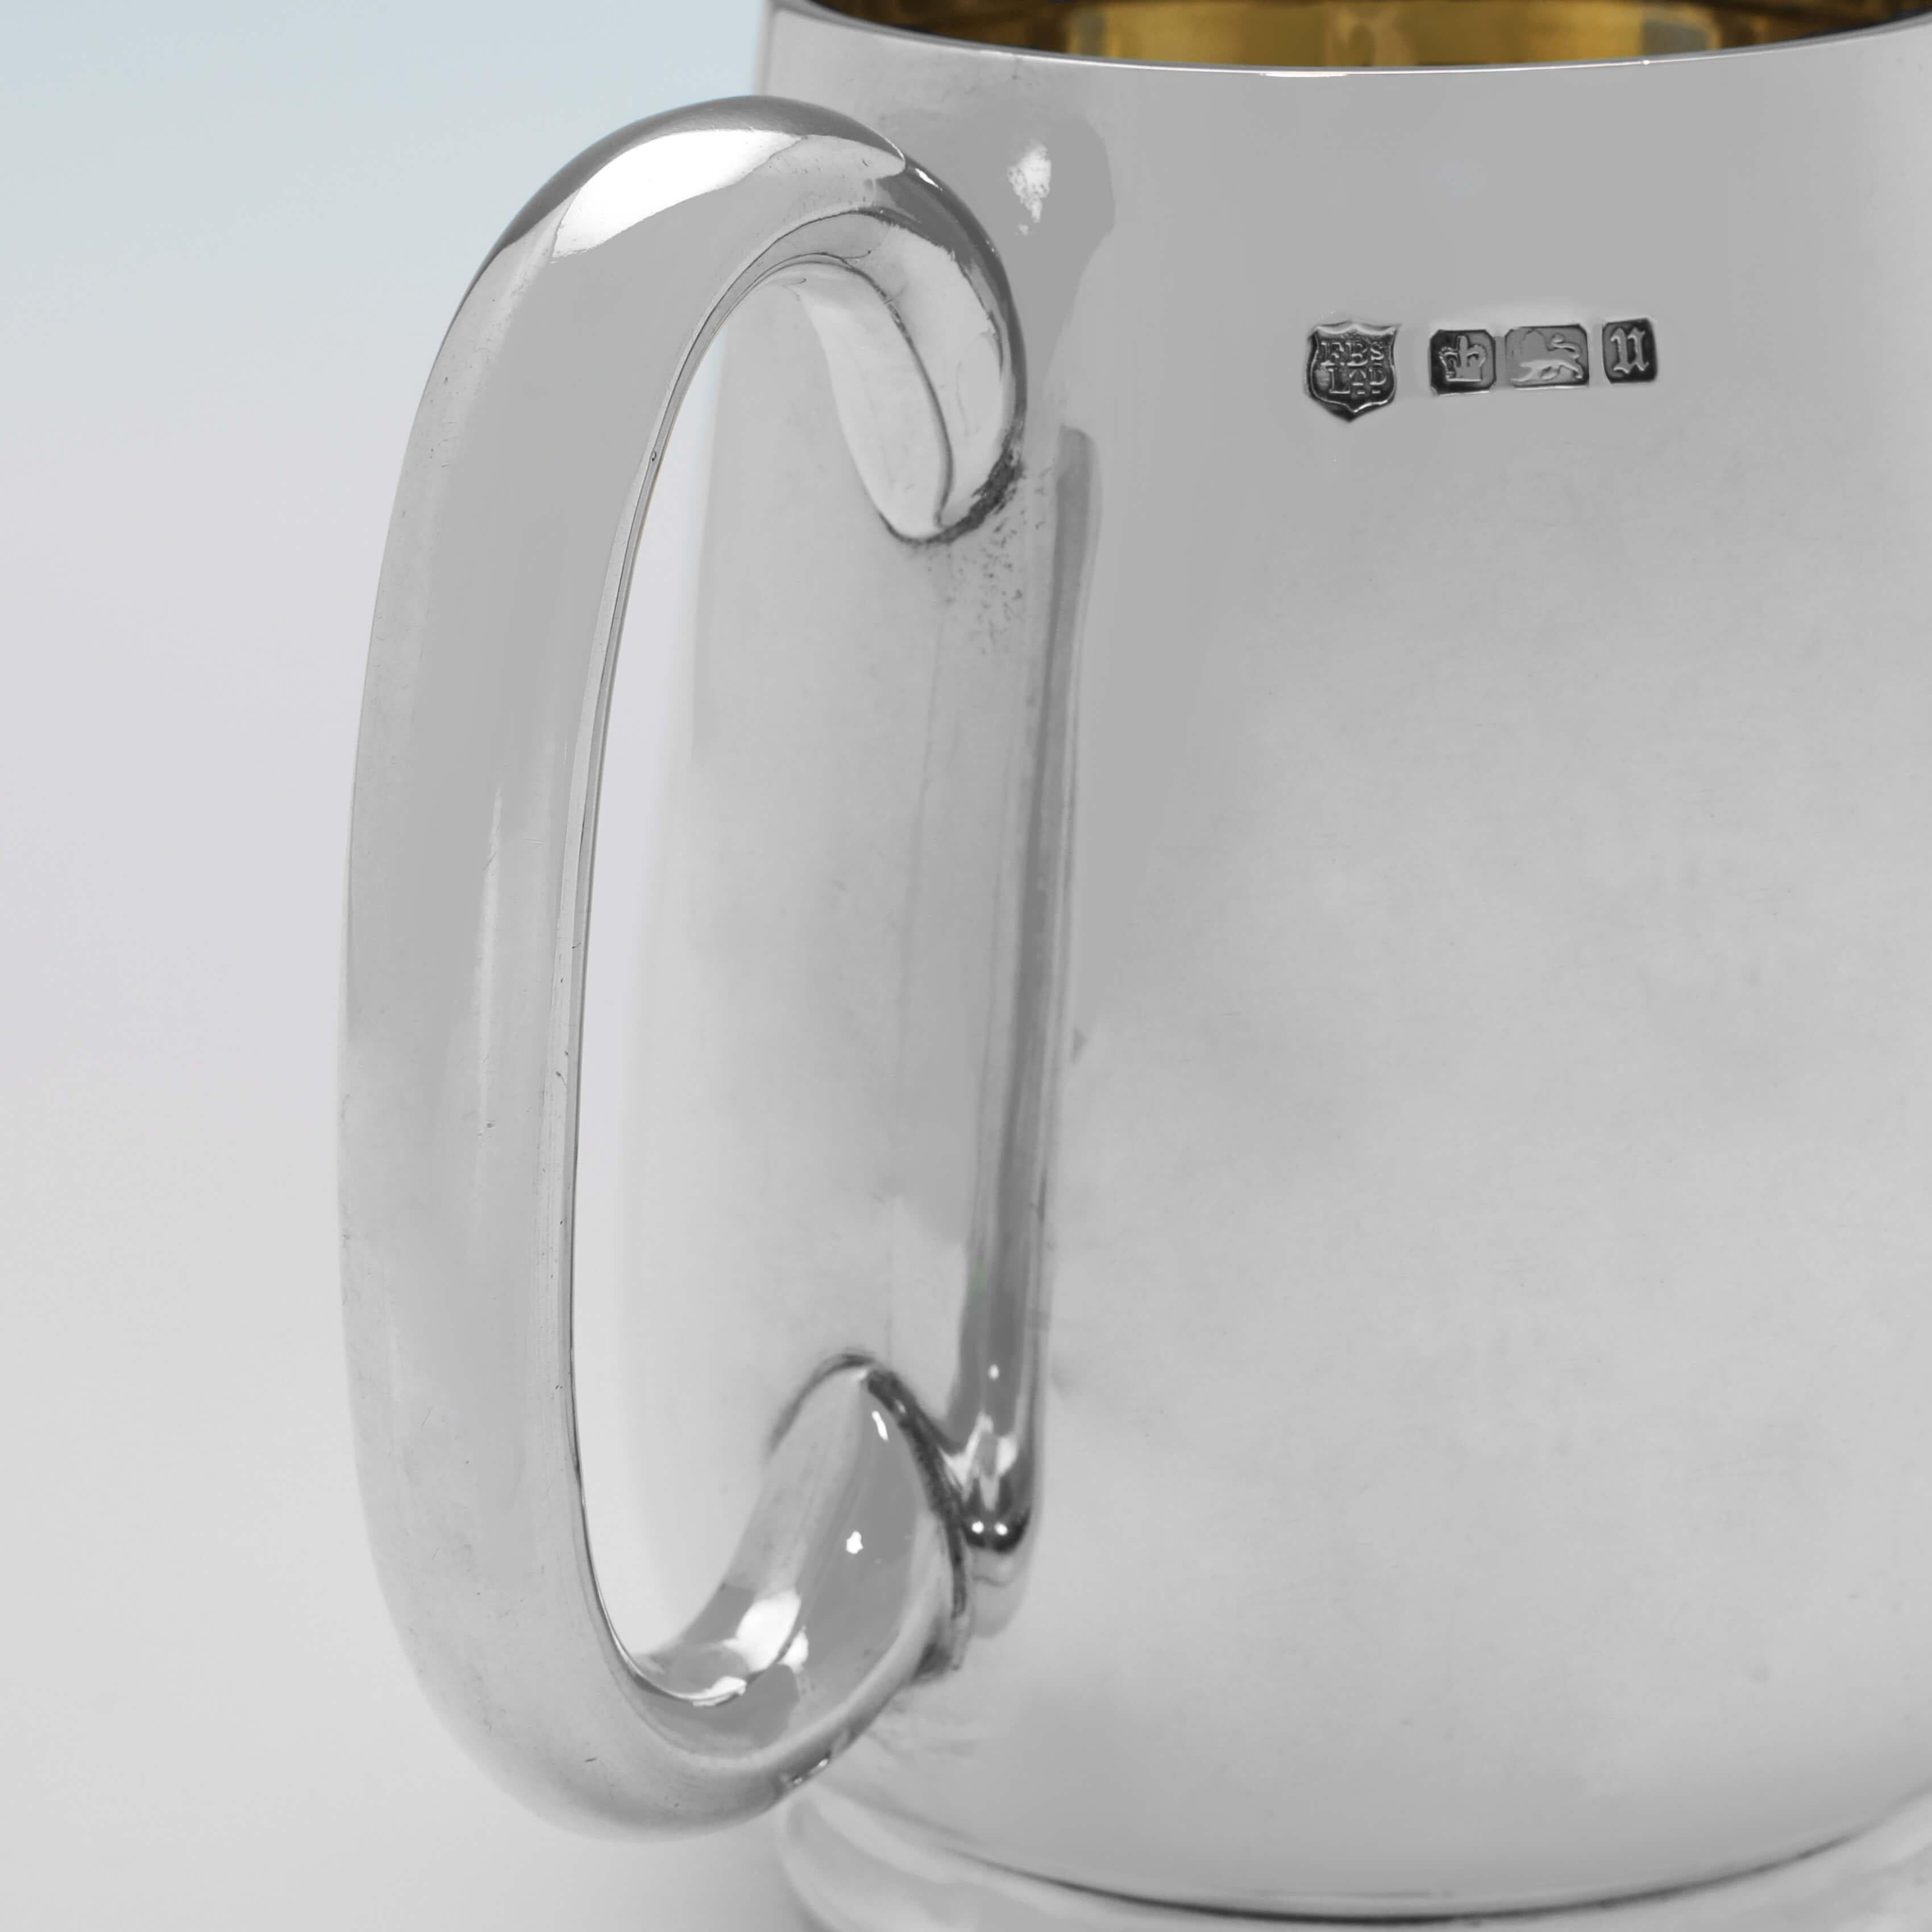 Hallmarked in sheffield in 1912 by Fenton Brothers Ltd., this handsome, antique sterling silver Christening mug, features a gilt interior, and a loop handle. 

The mug measures: 3.75